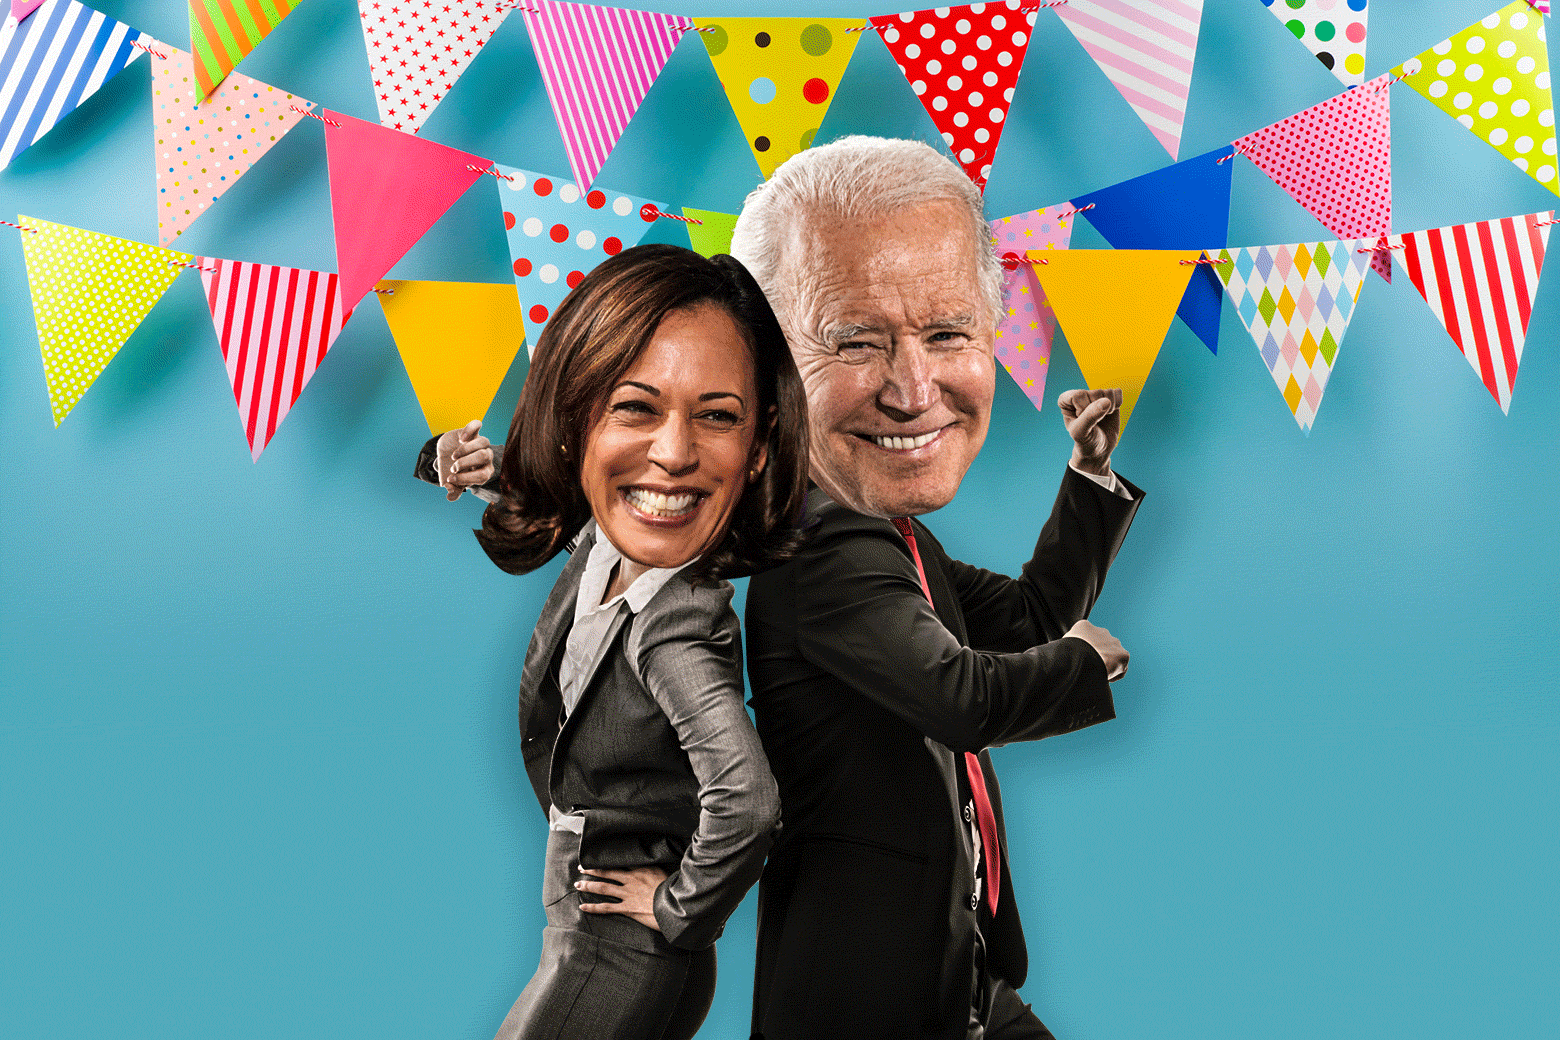 An illustrated GIF of Joe Biden dancing with Kamala Harris and then her head changes to a question mark.